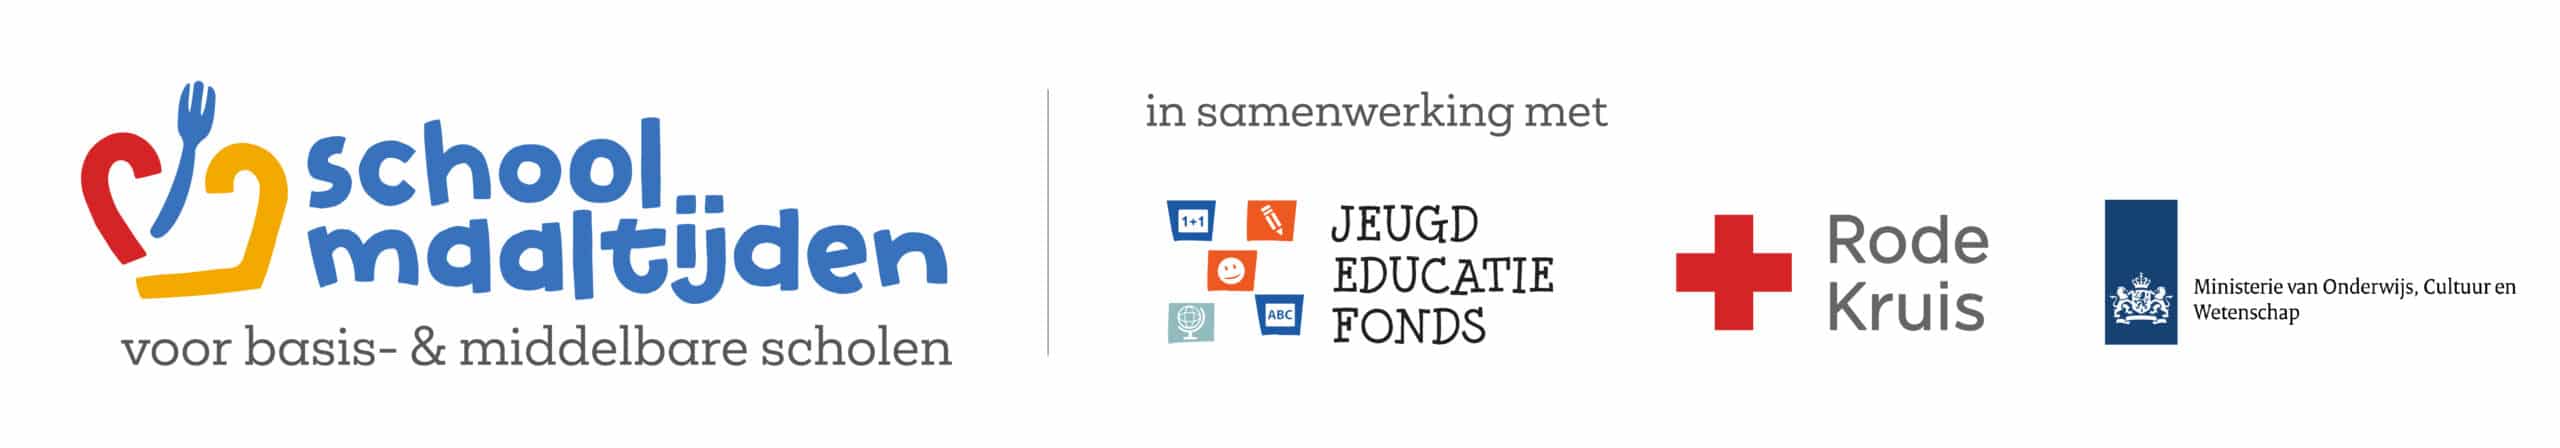 Logo of the School Meals Programme together with the logos of the Dutch Youth Education Fund, the Netherlands Red Cross, and the Ministry of Education, Culture and Science.